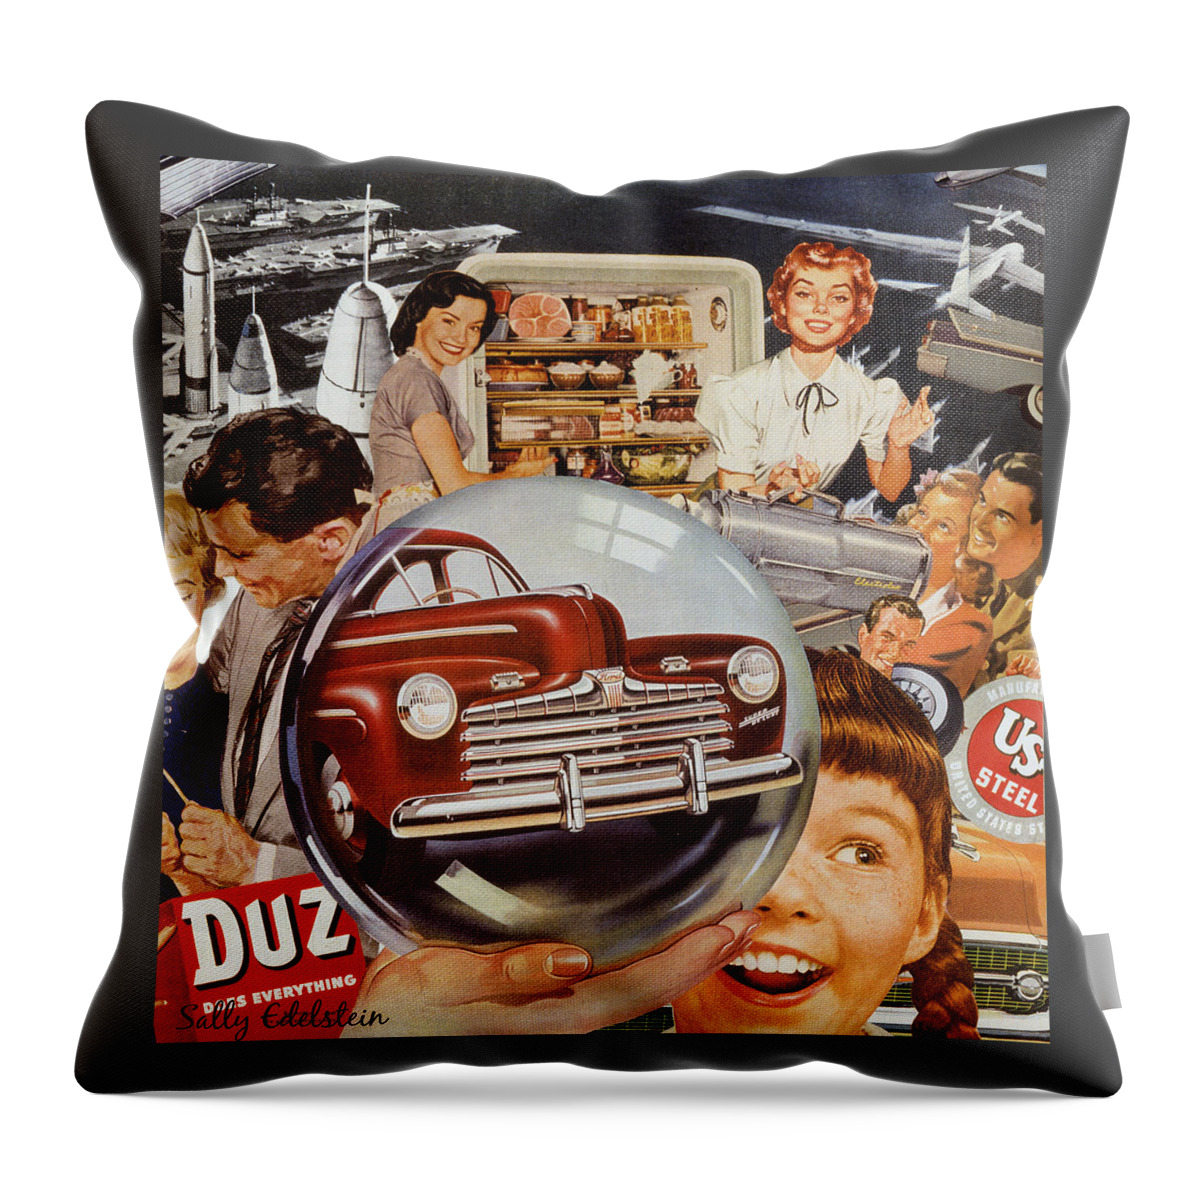 Collage Throw Pillow featuring the mixed media Mutually Assured Consumption And Destruction by Sally Edelstein